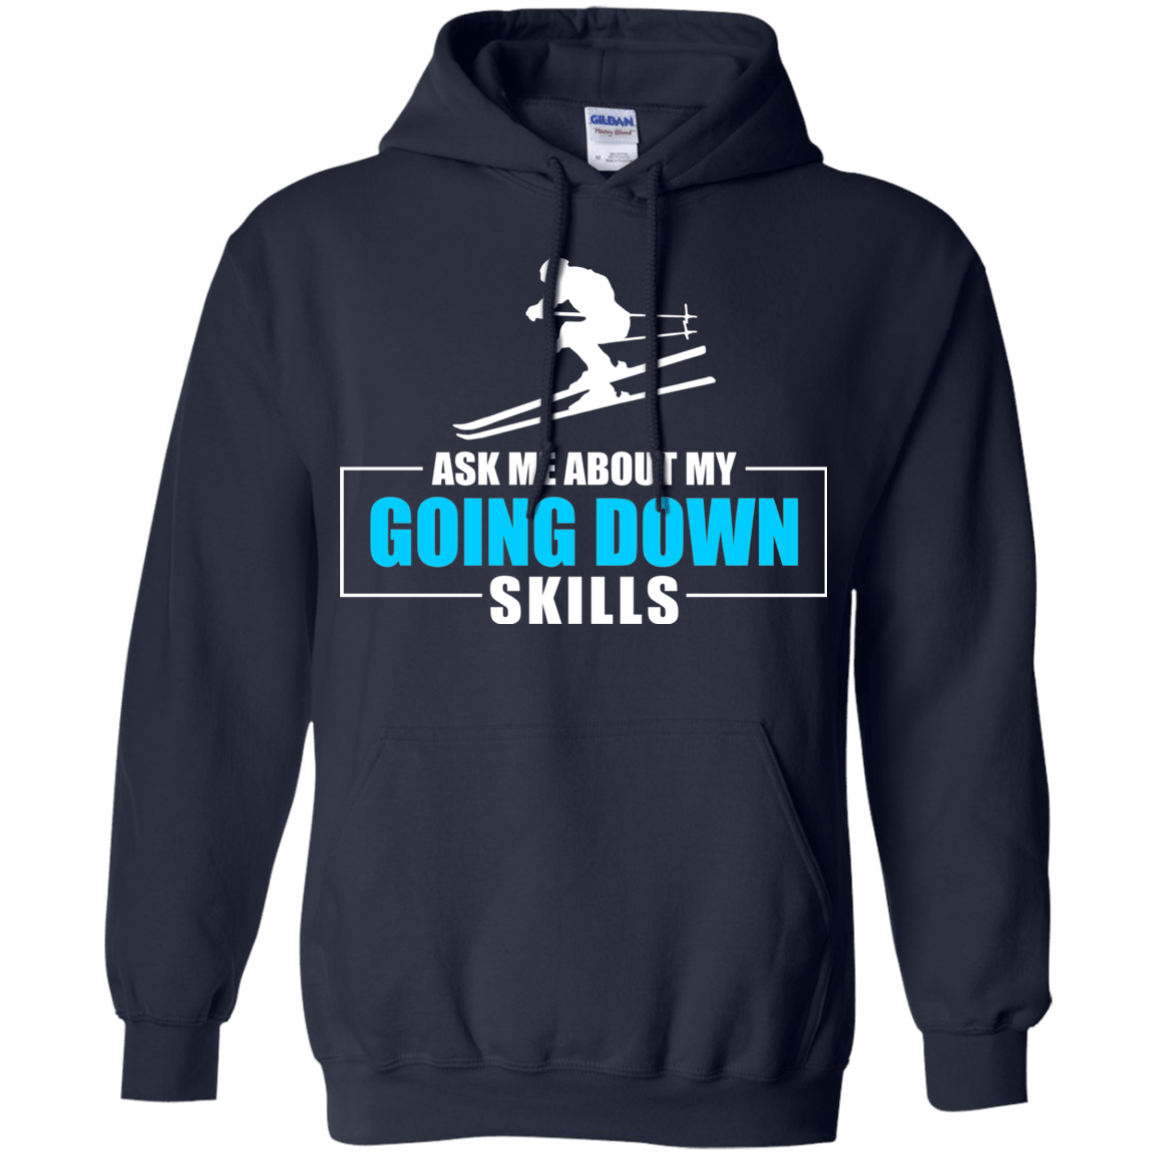 Ask Me About My Going Down Skills - Ski Hoodies - Powderaddicts